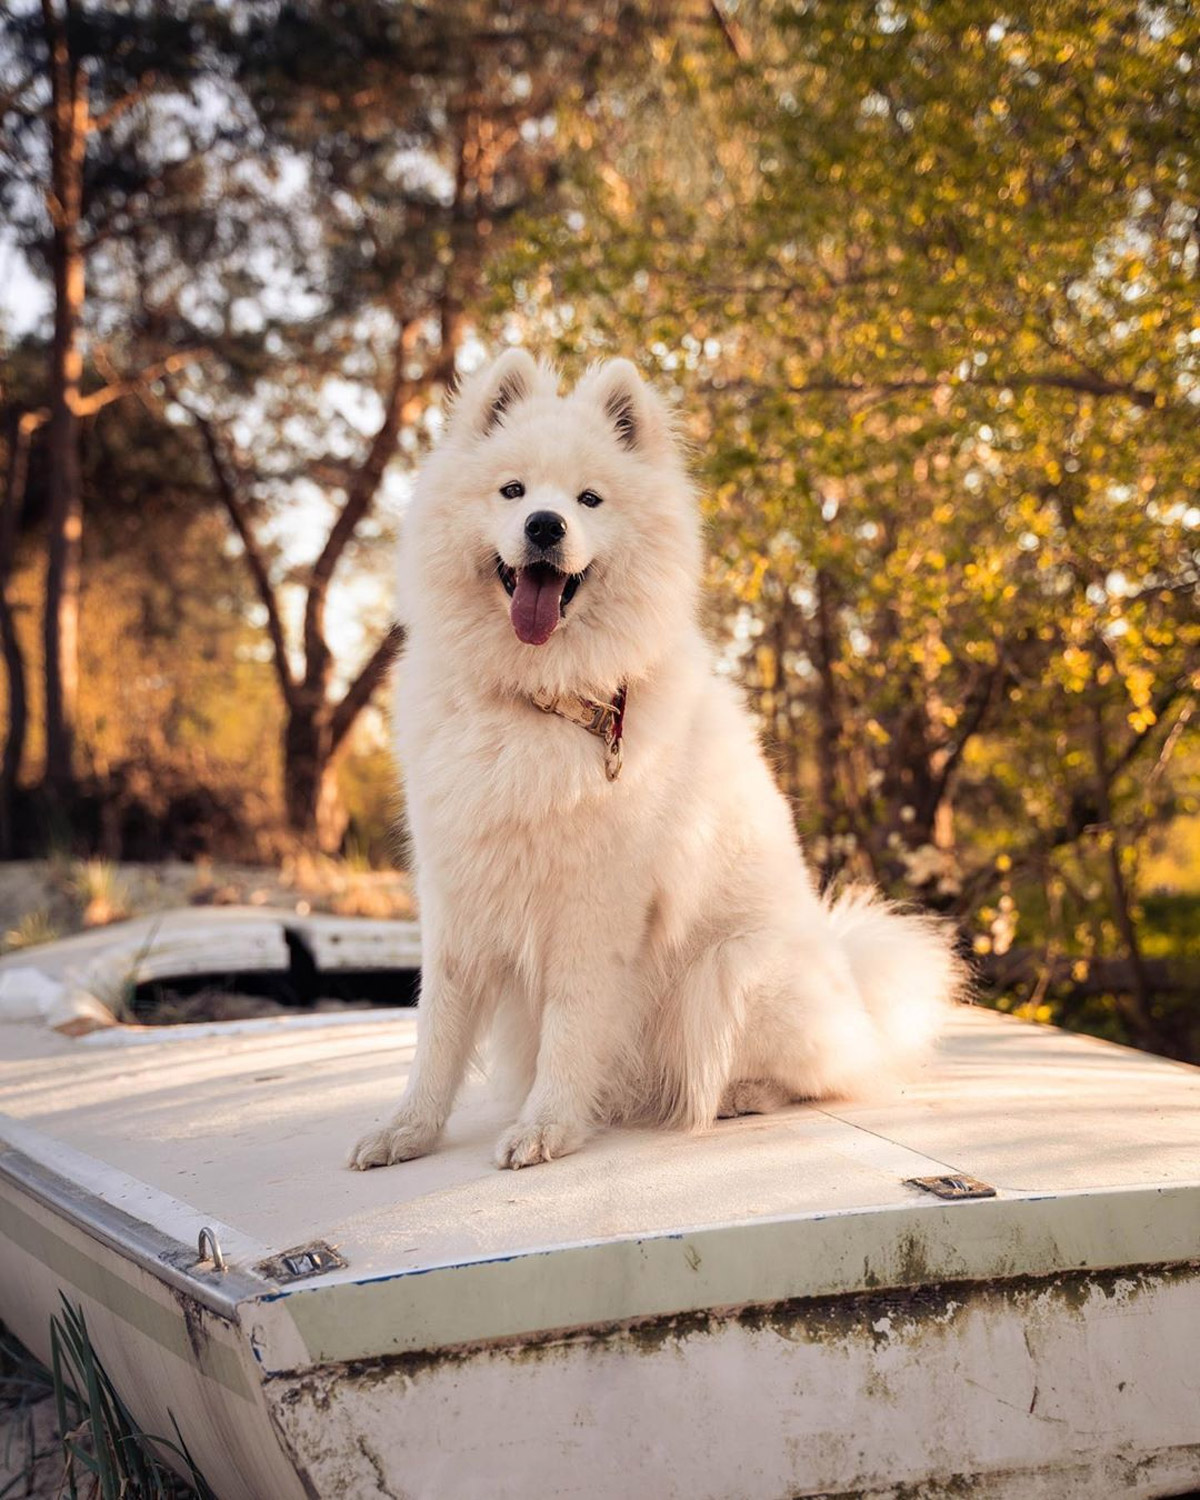 9 Adorable Pet Instagram Accounts to Follow for Wholesome, Inspiring Content!